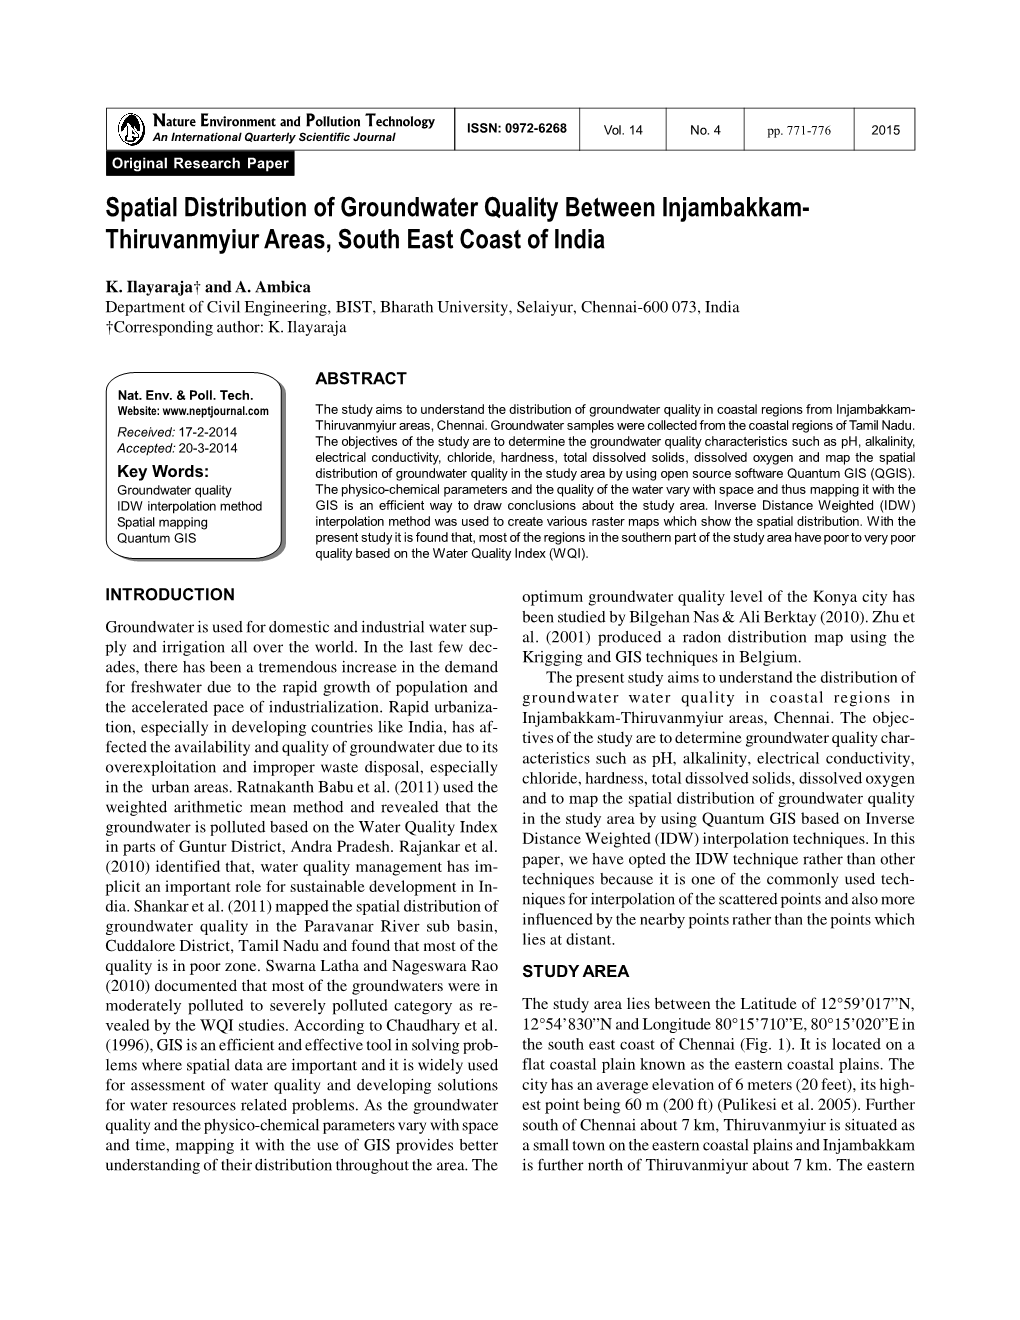 Spatial Distribution of Groundwater Quality Between Injambakkam- Thiruvanmyiur Areas, South East Coast of India